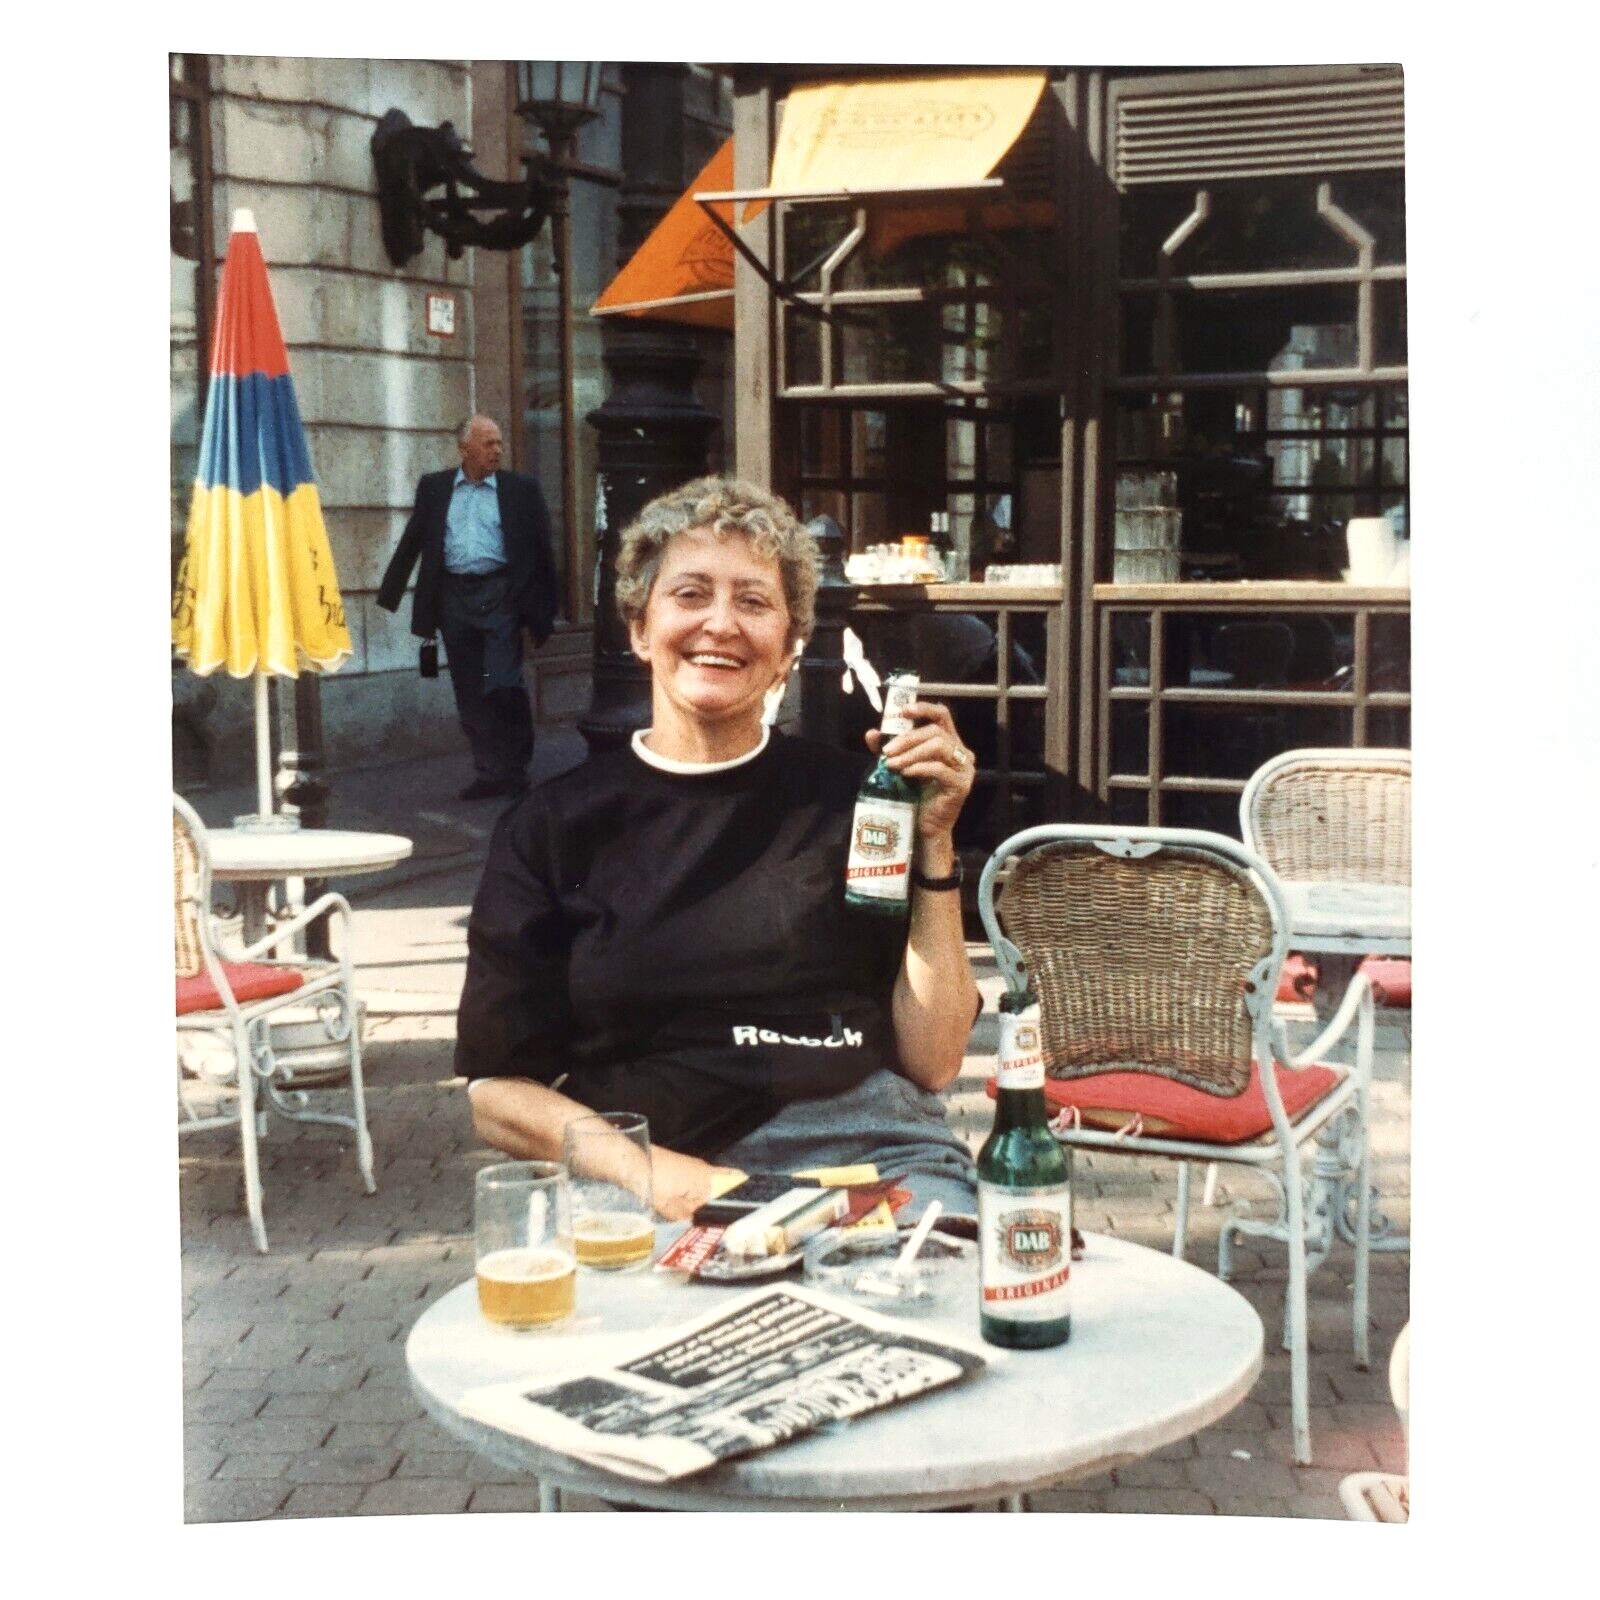 Drinking DAB Beer in Germany Photo 1990s Found Restaurant Patio Snapshot B3337